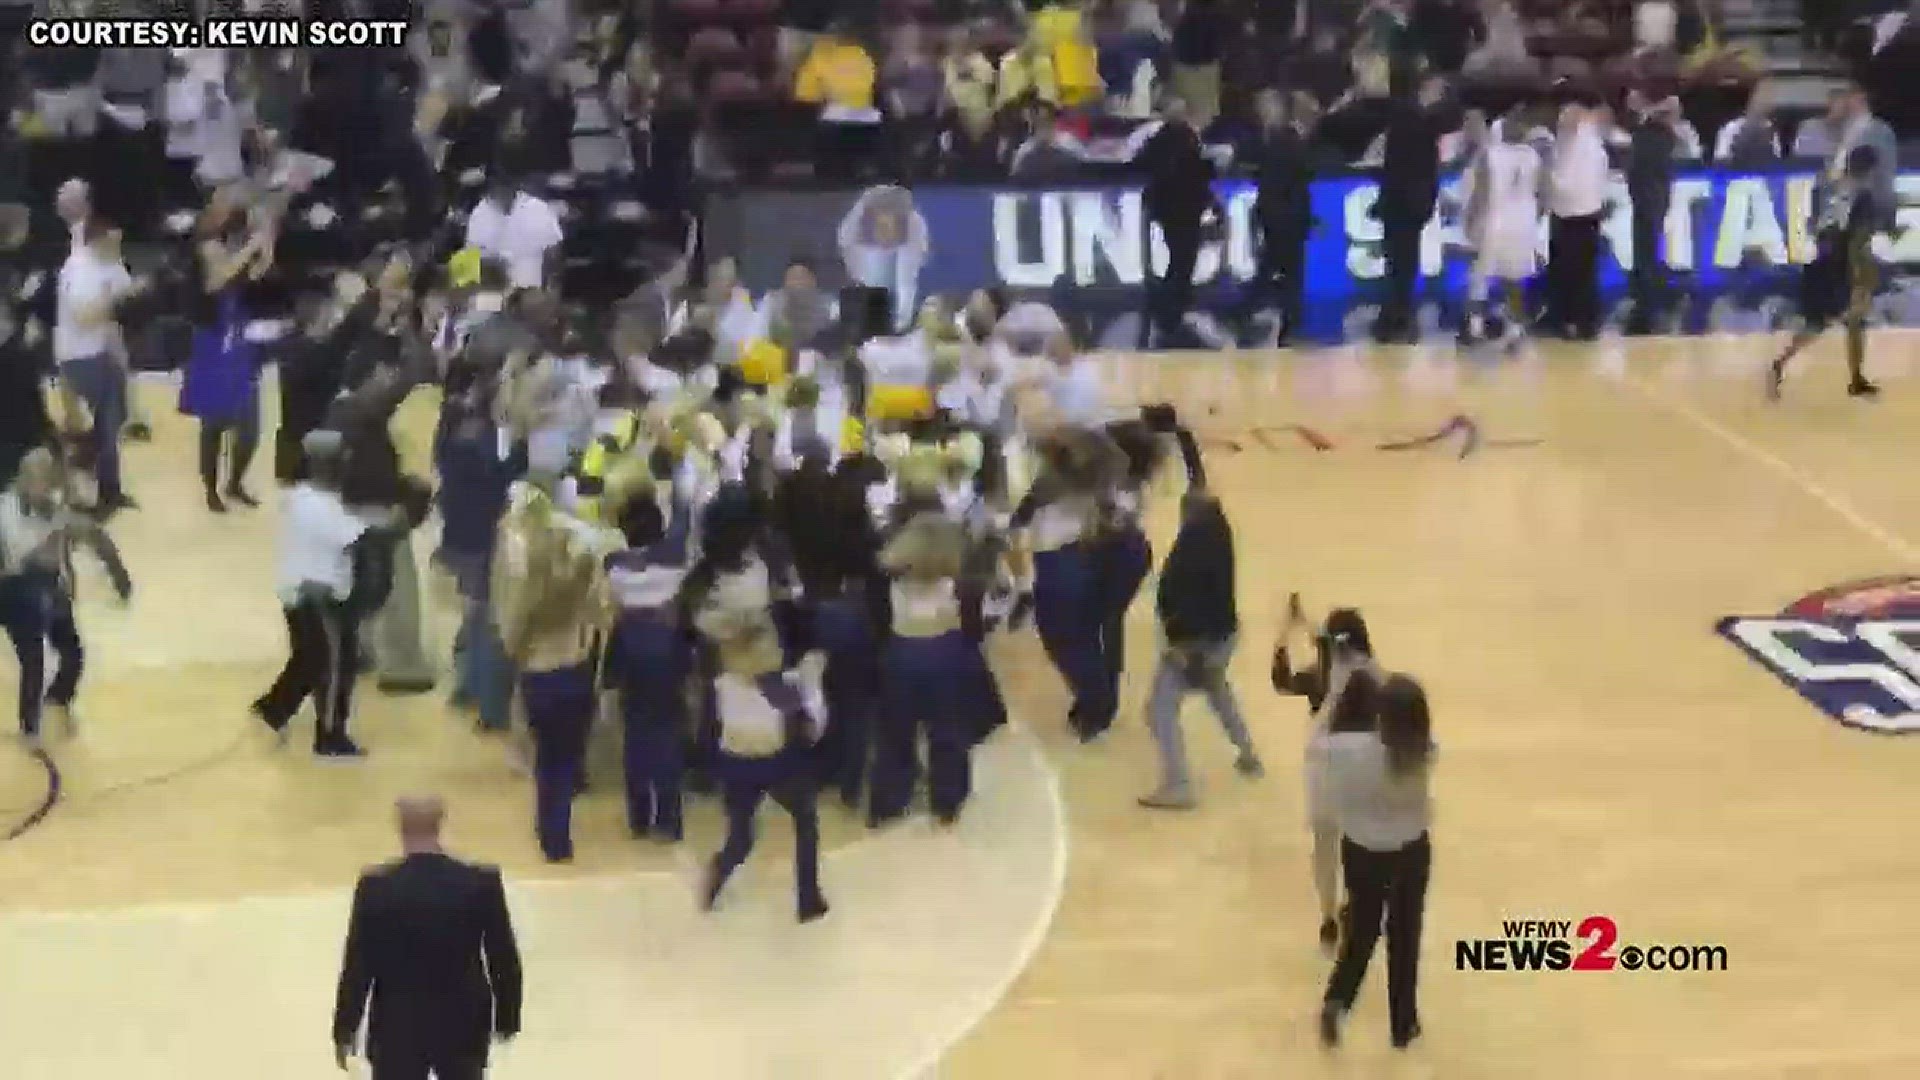 UNCG Celebrates After Win Against ETSU To Go Dancing